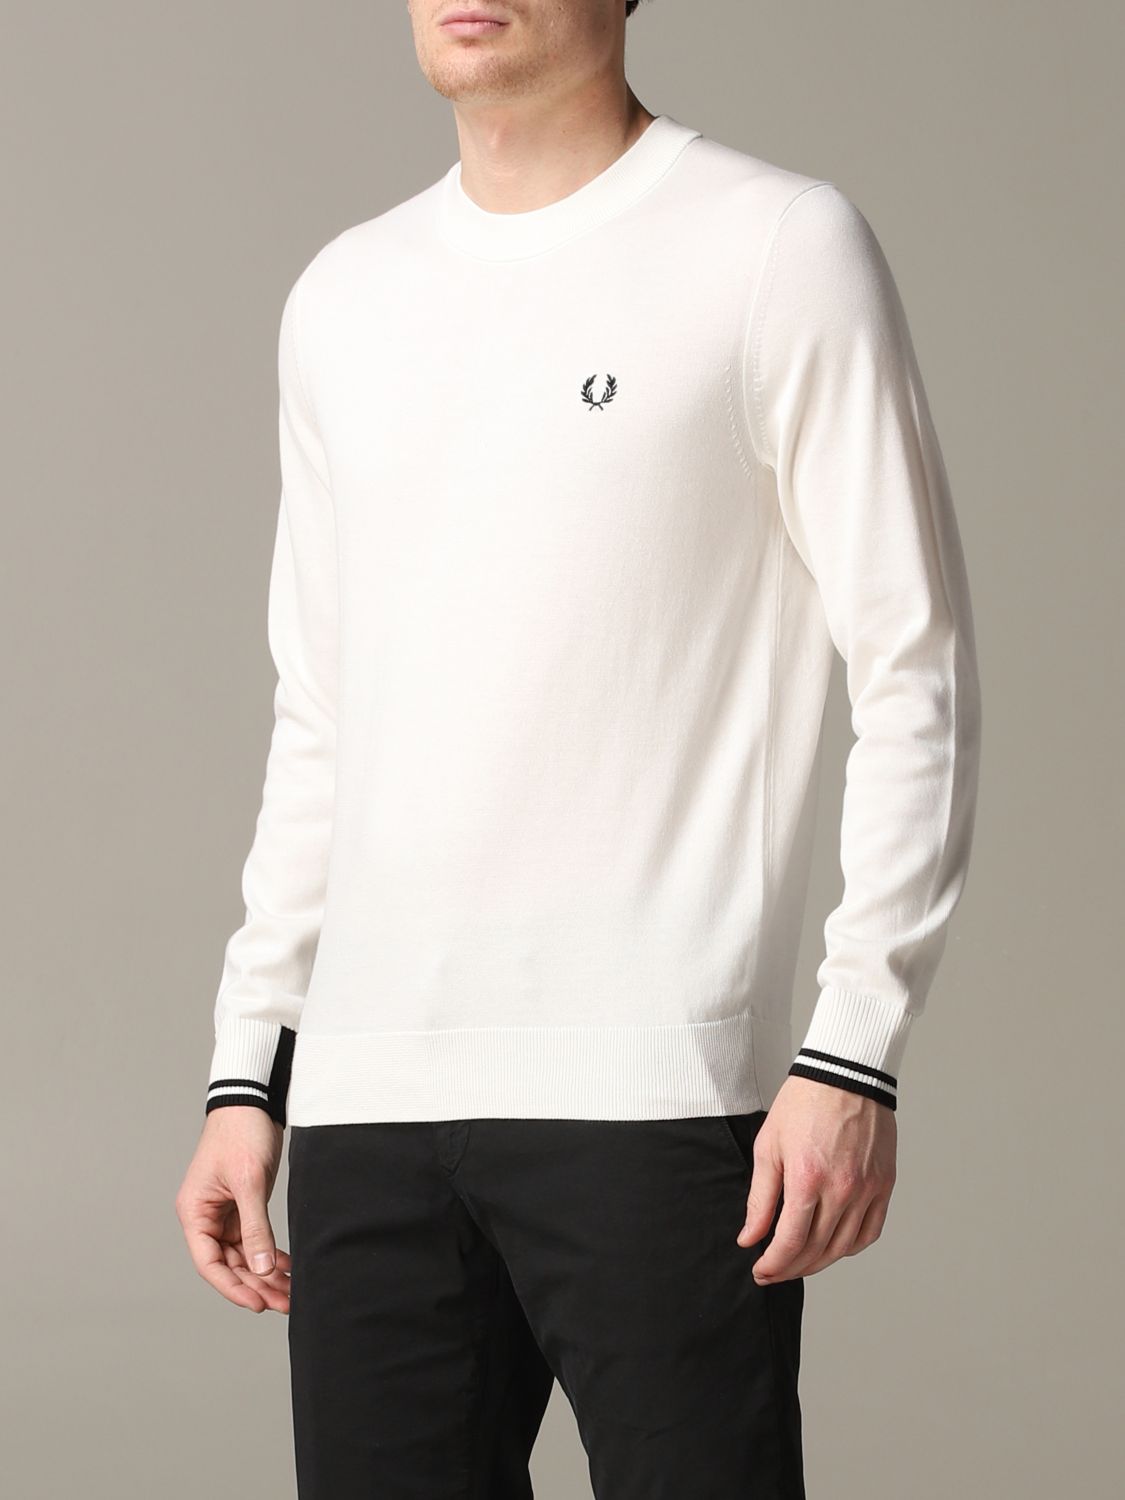 Fred Perry Outlet: Sweater men | Sweater Fred Perry Men White | Sweater Fred Perry K8522 Giglio EN